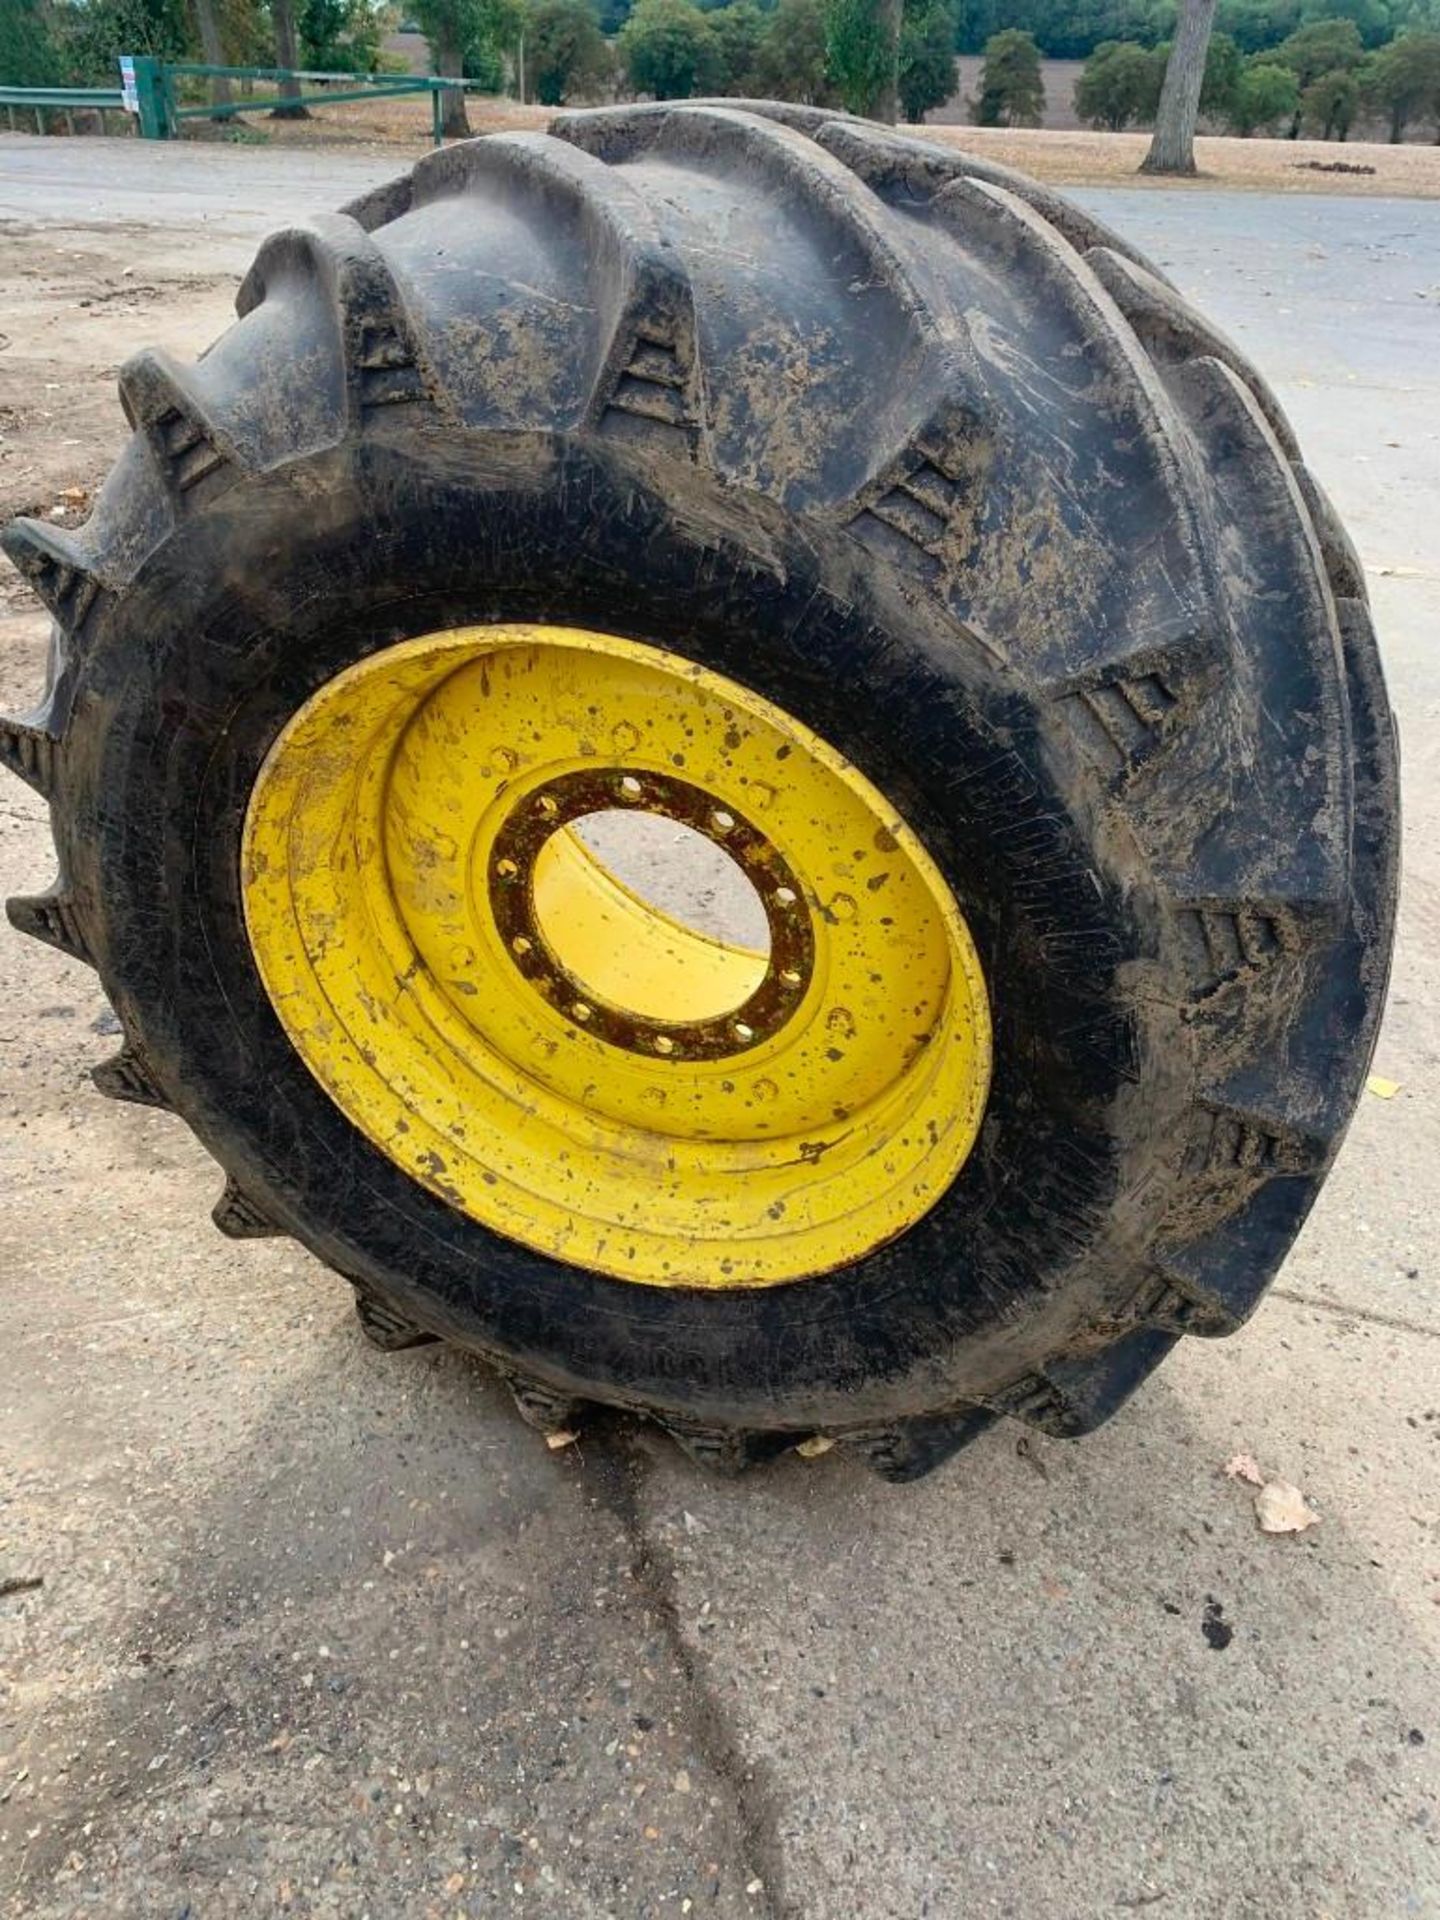 Trelleborg Tyres and Rims, Rear Tyres: 850/55 R42, Front Tyres: 750/50 R30.5 - Image 2 of 6